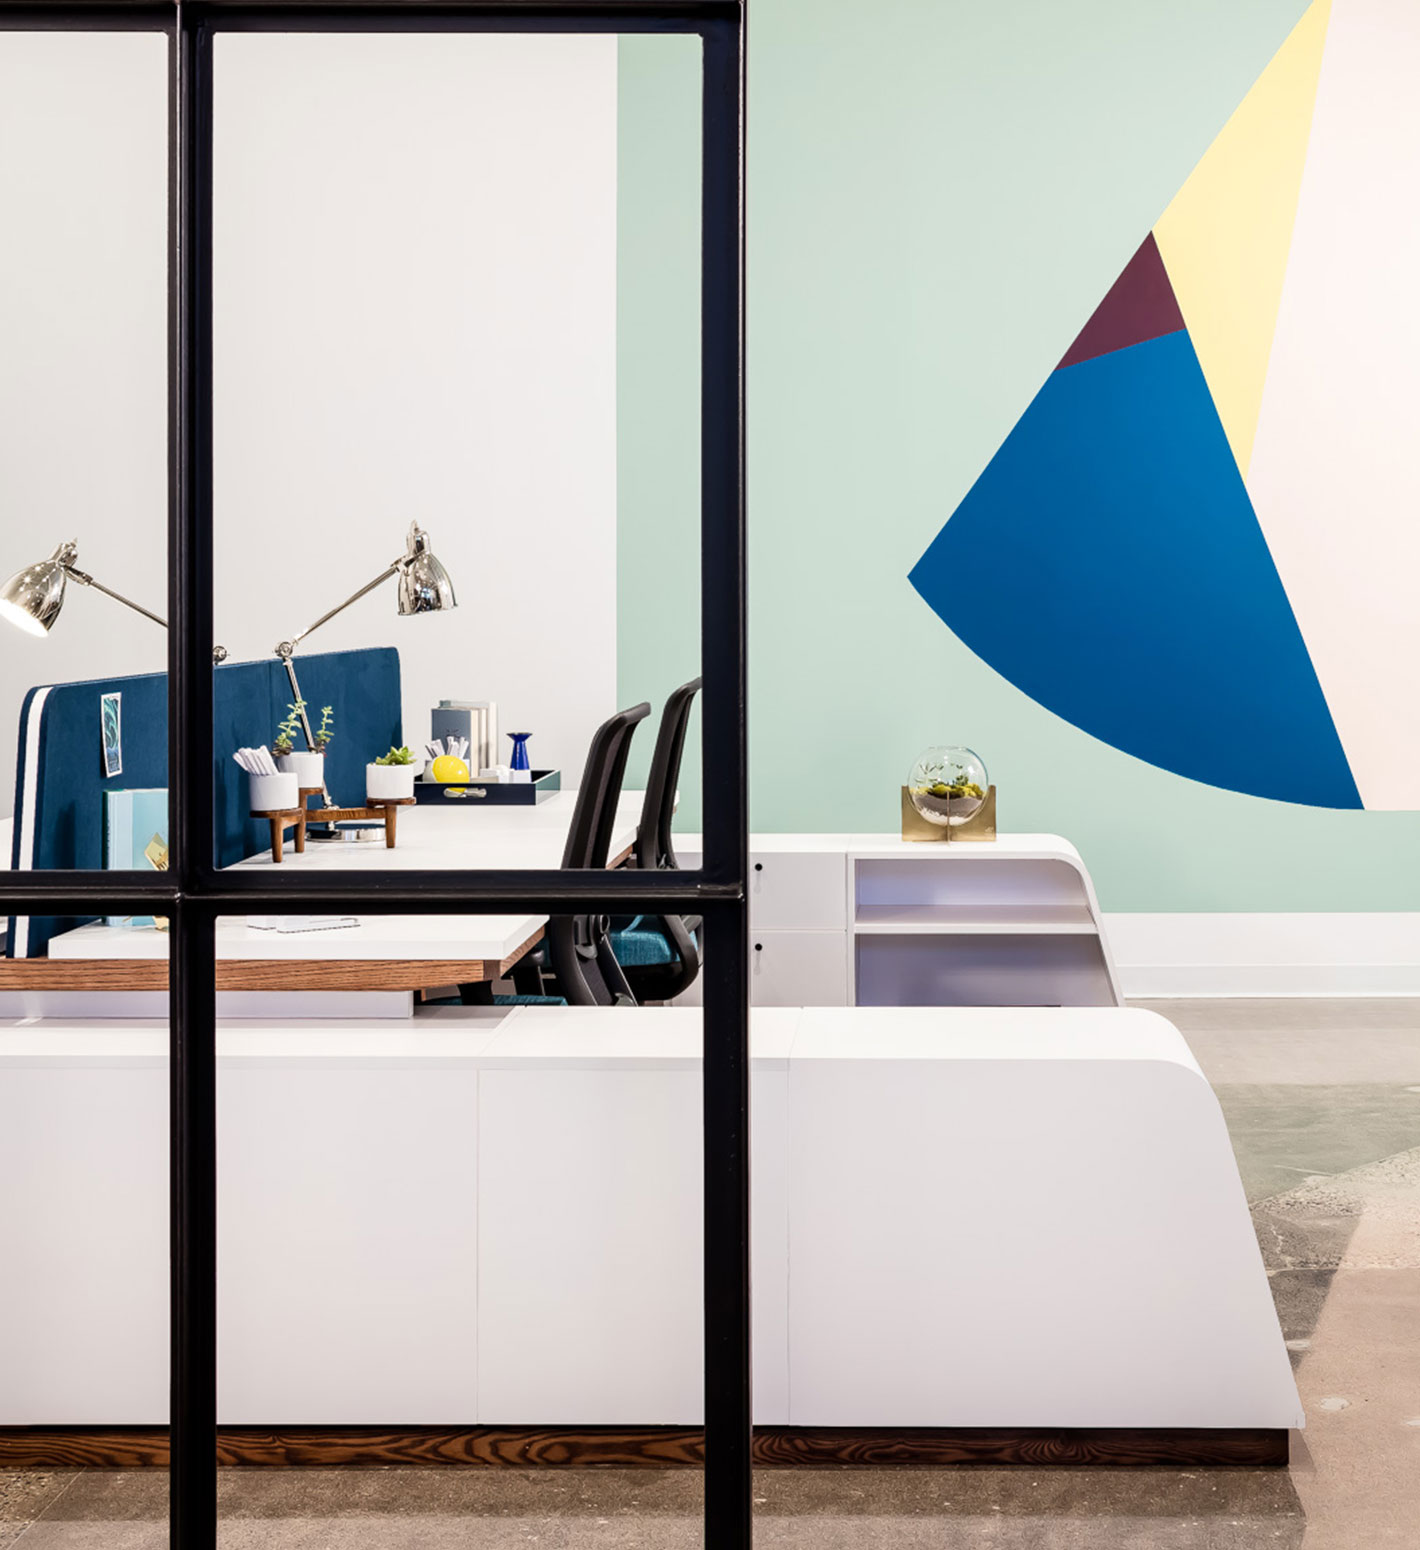 An abstract painting hangs on the wall near a desk area featuring angular white cabinets.